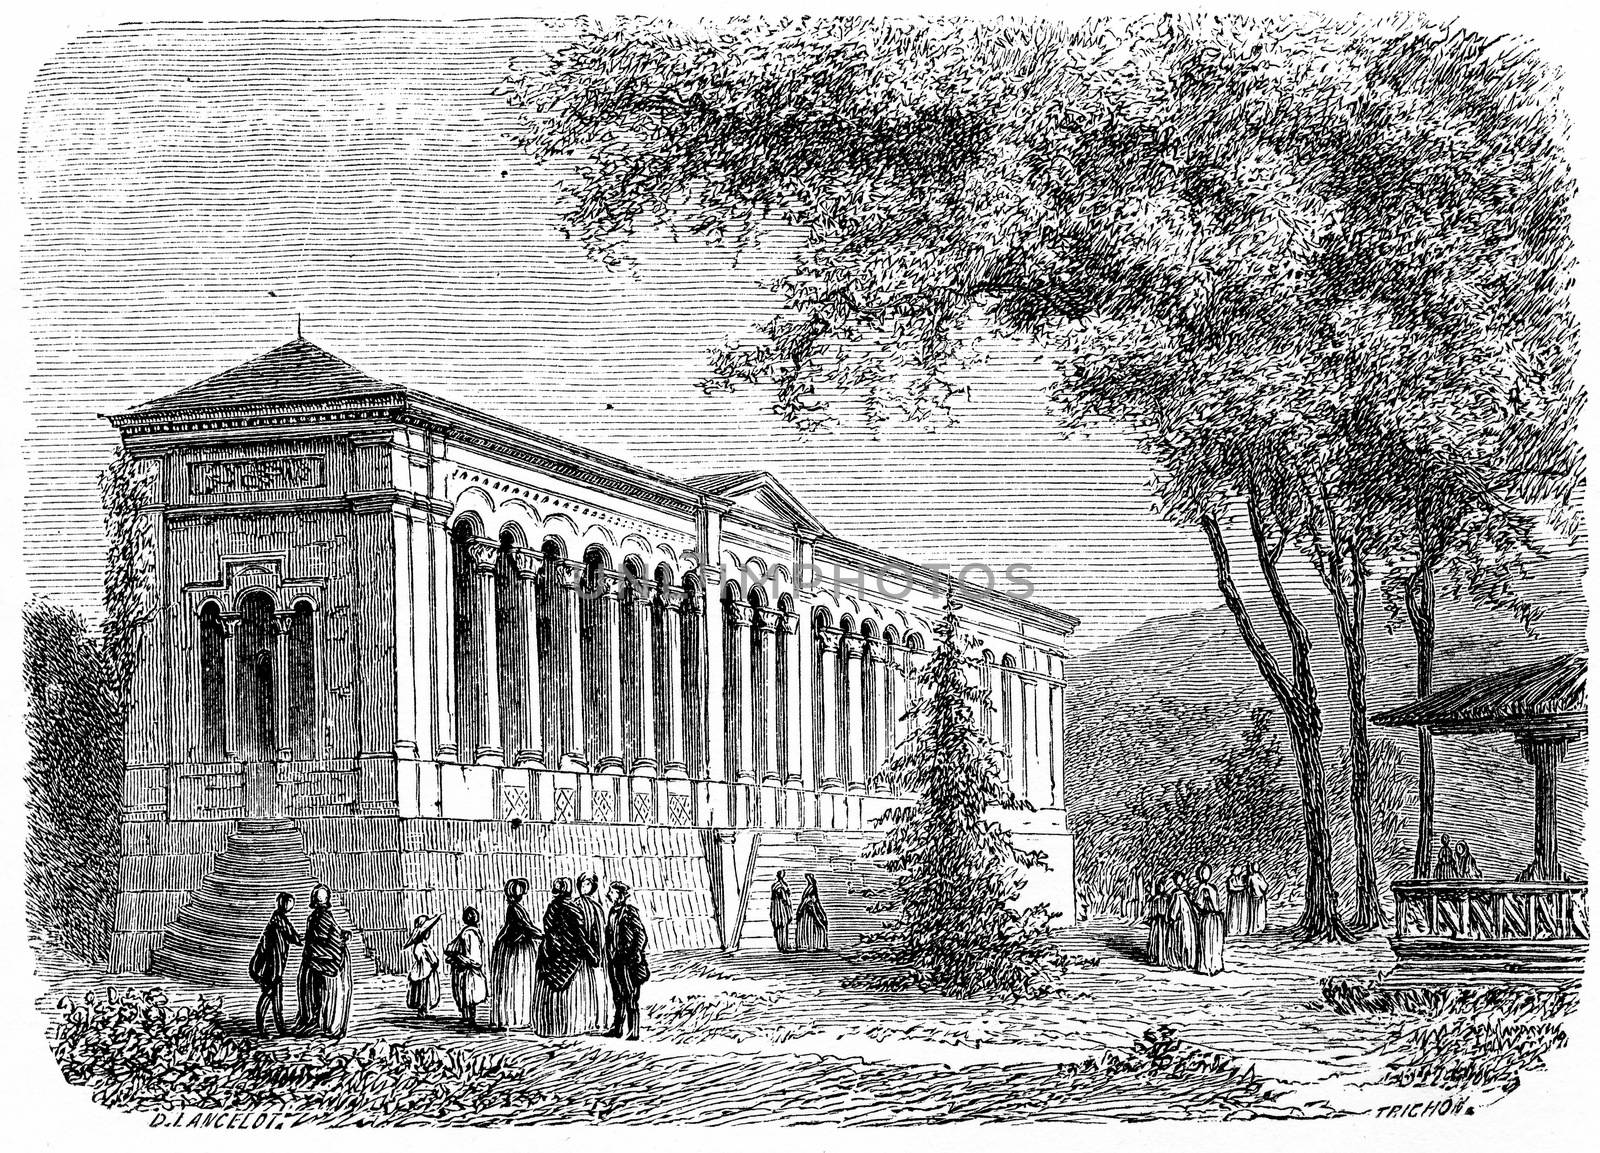 Trinkhalle, vintage engraving. by Morphart